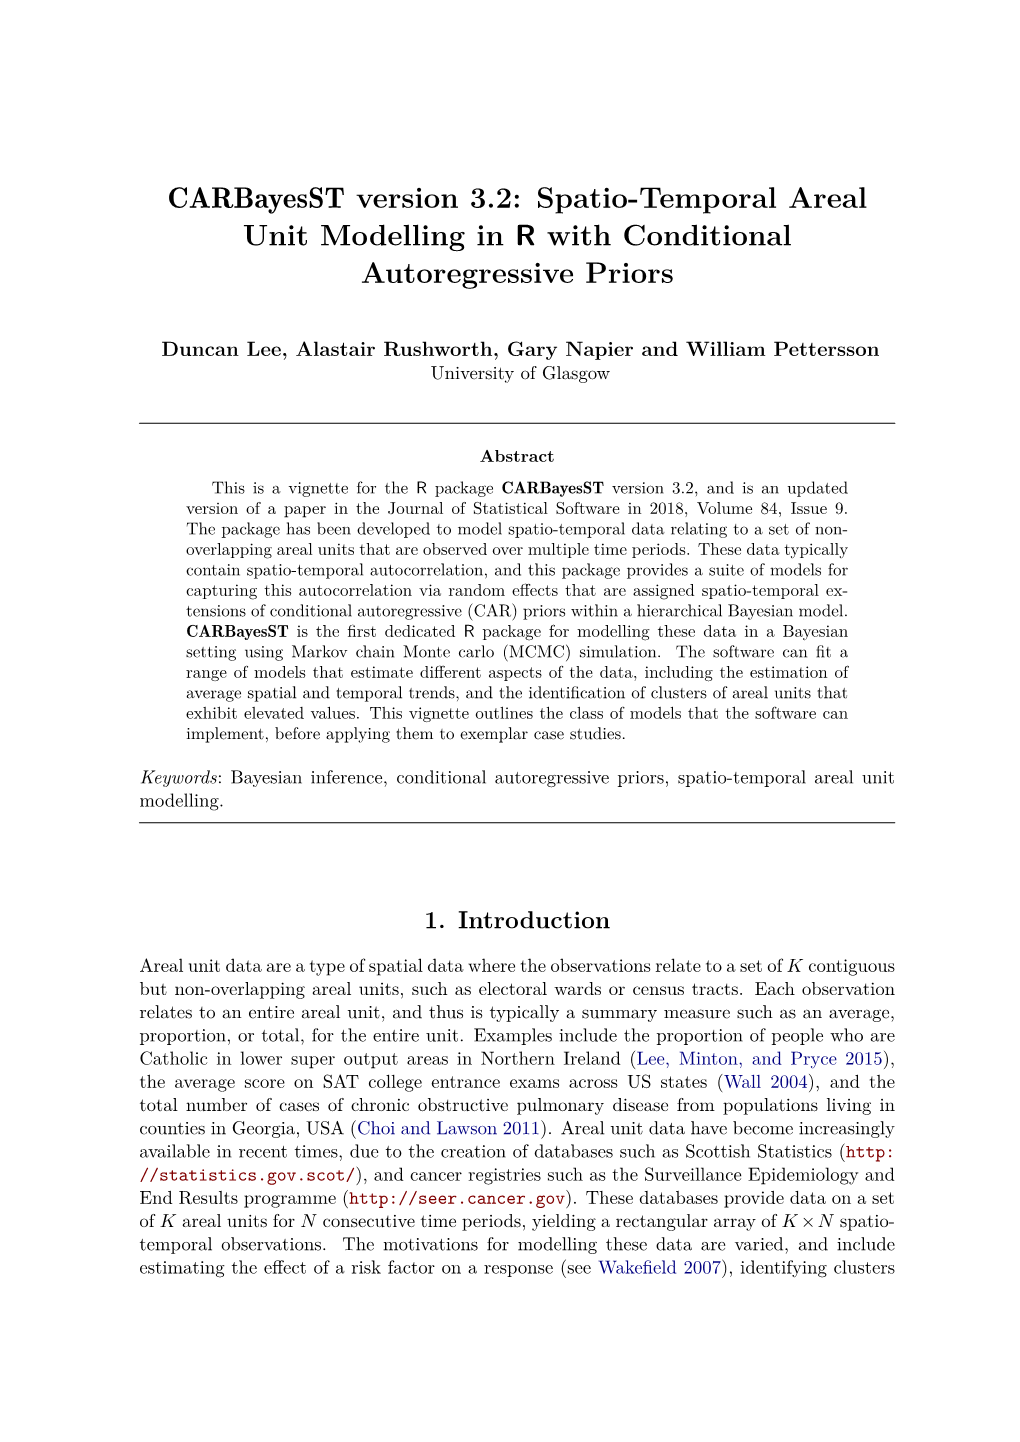 Spatio-Temporal Areal Unit Modelling in R with Conditional Autoregressive Priors